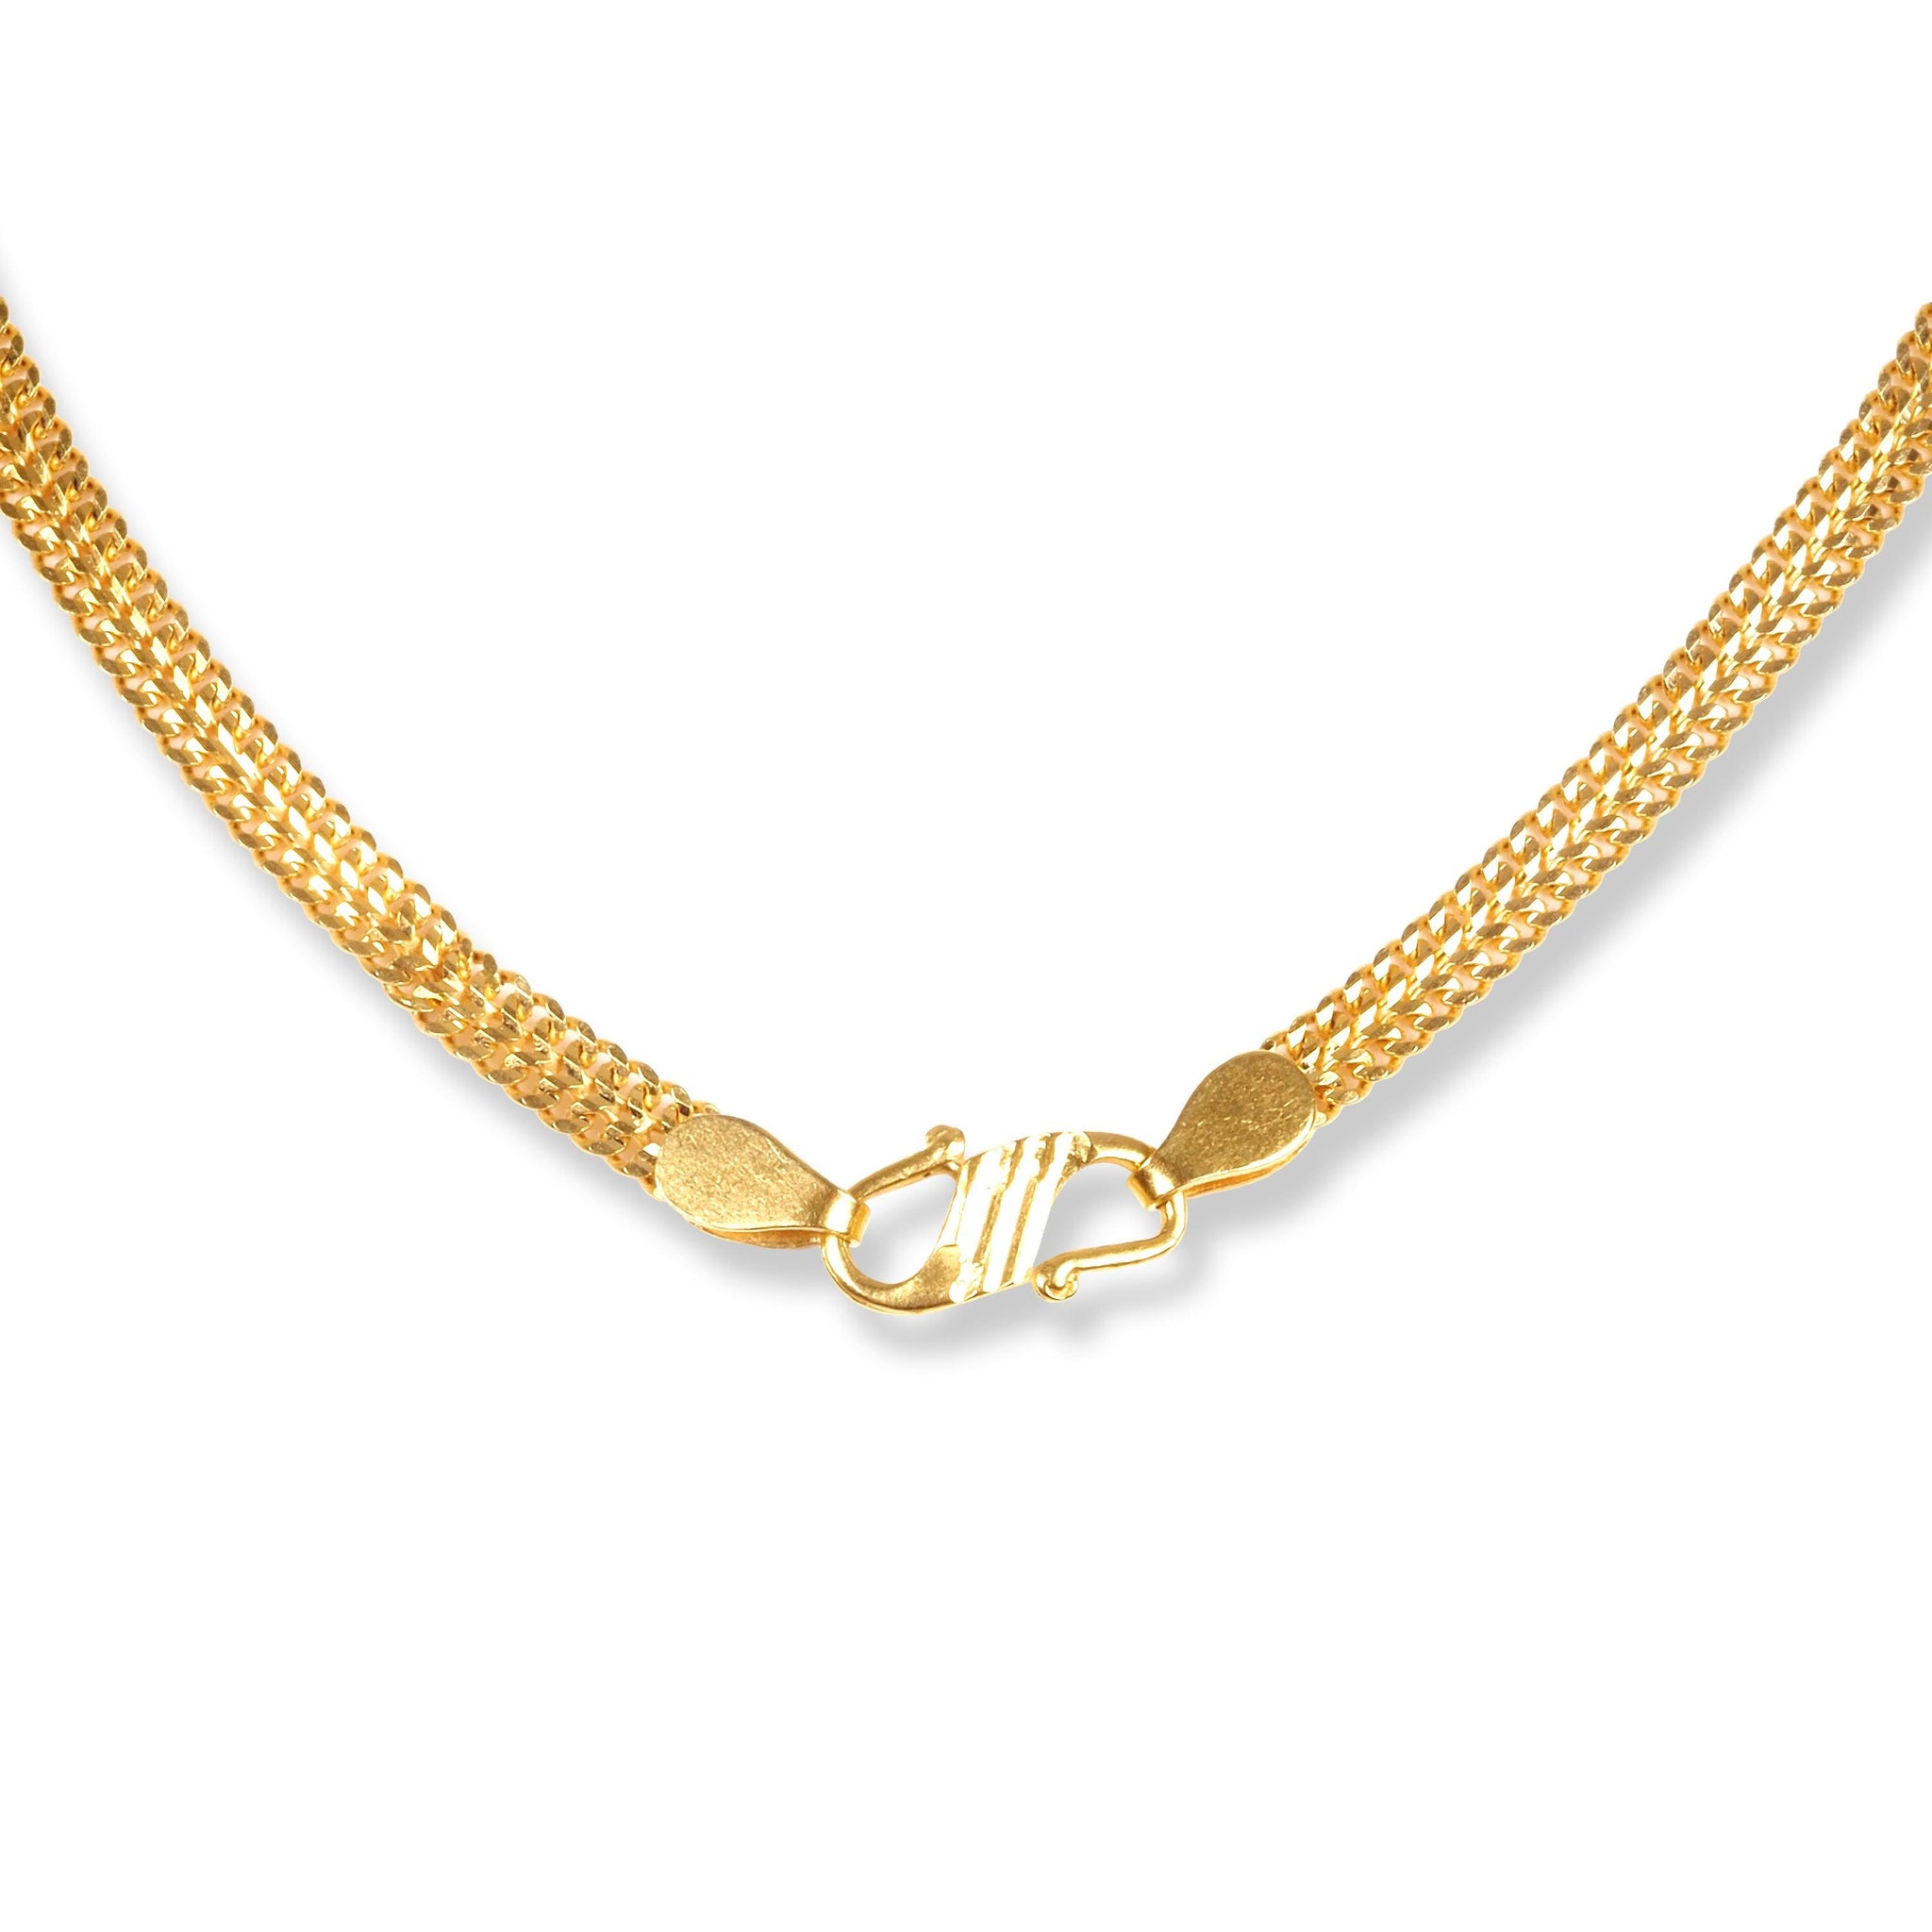 22ct Gold Flat Chain with S Clasp C-7140